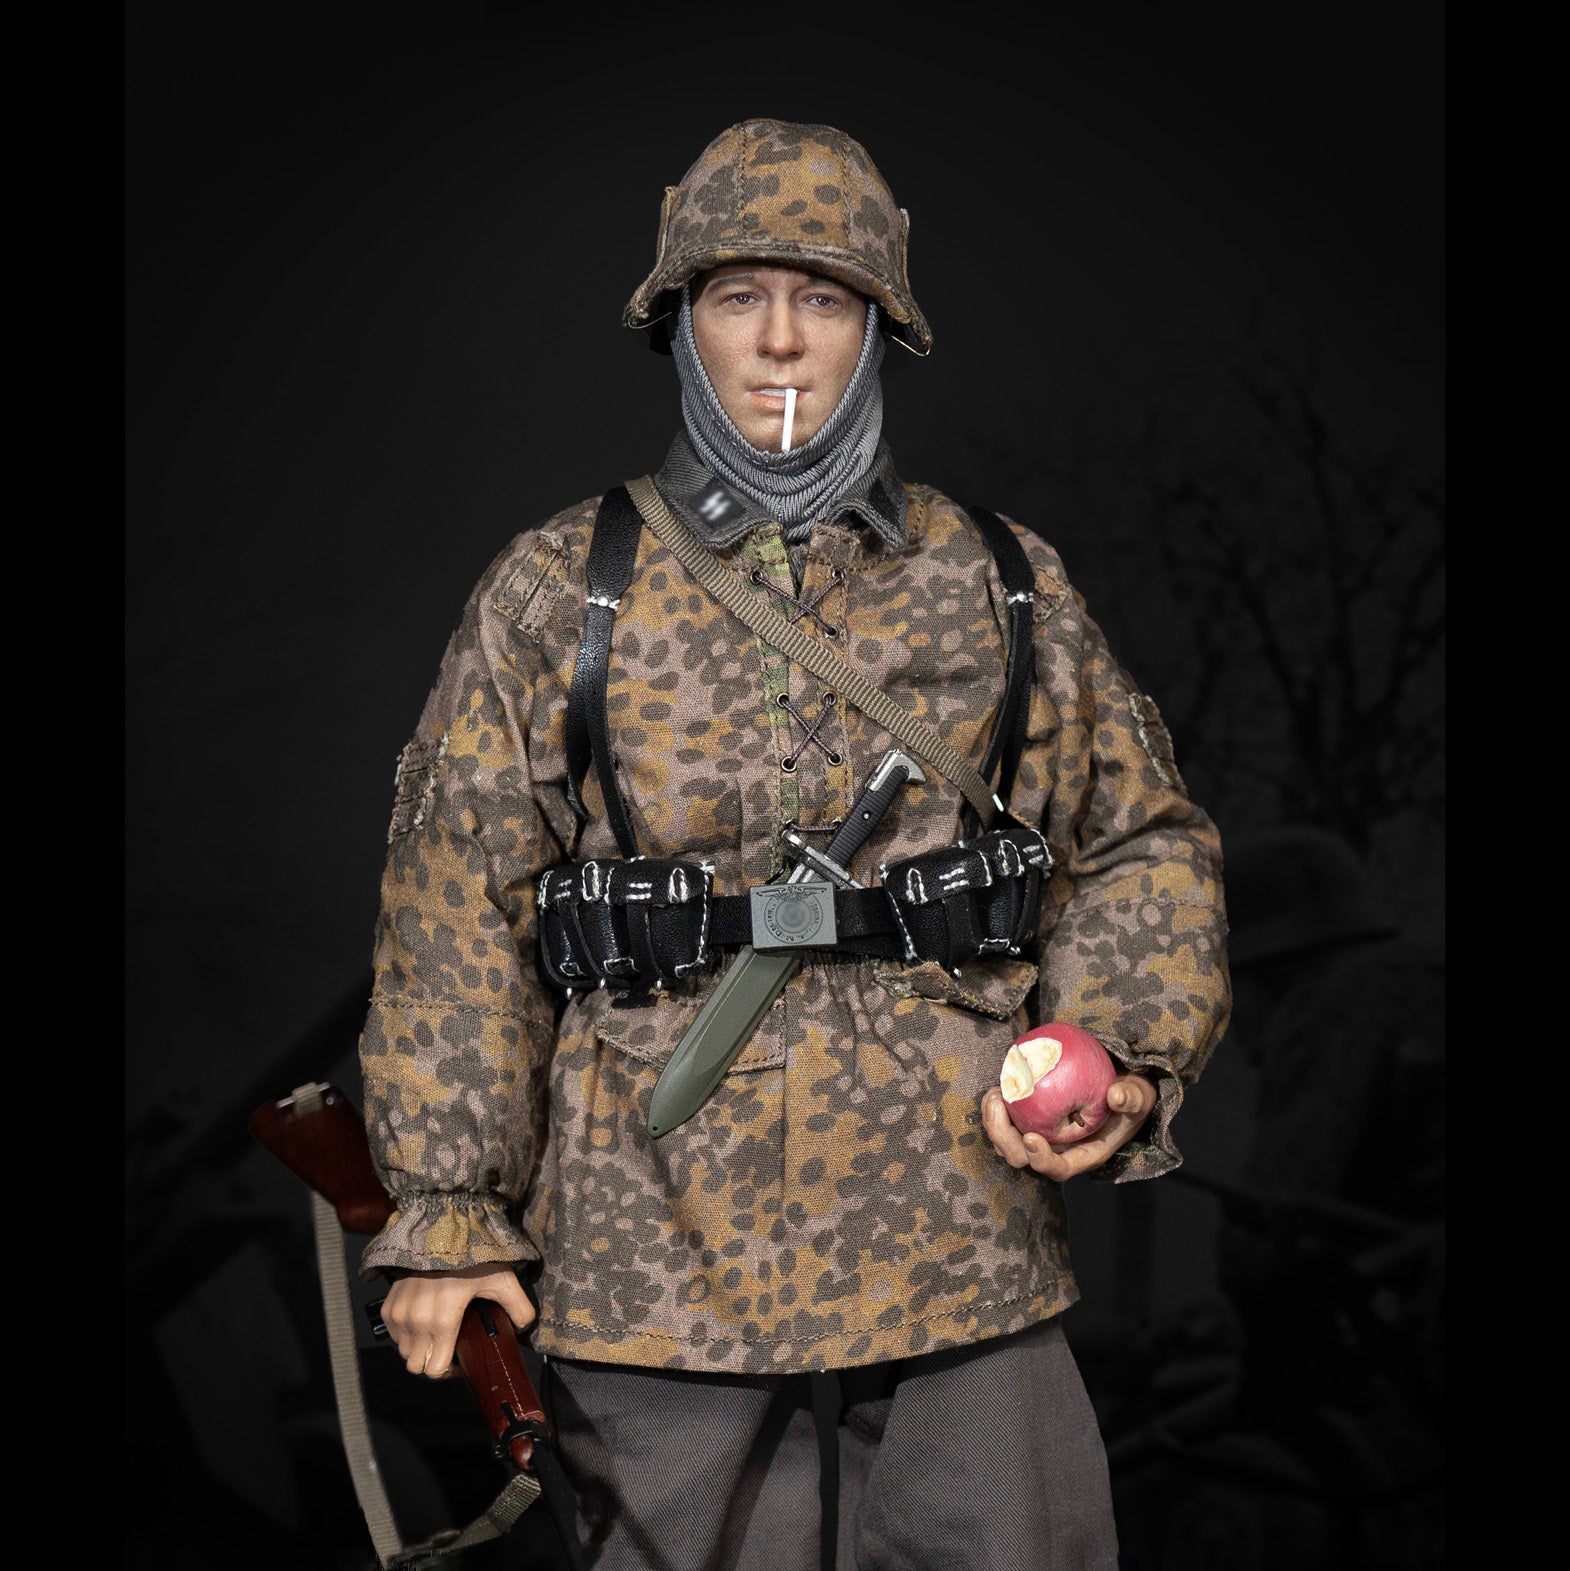 Facepoolfigure - FP-015B - Discover History Series - 1st SS Panzer Division, Kampfgruppe Hansen, 1944 Ardenne - Rifleman (1/6 Scale) - Marvelous Toys